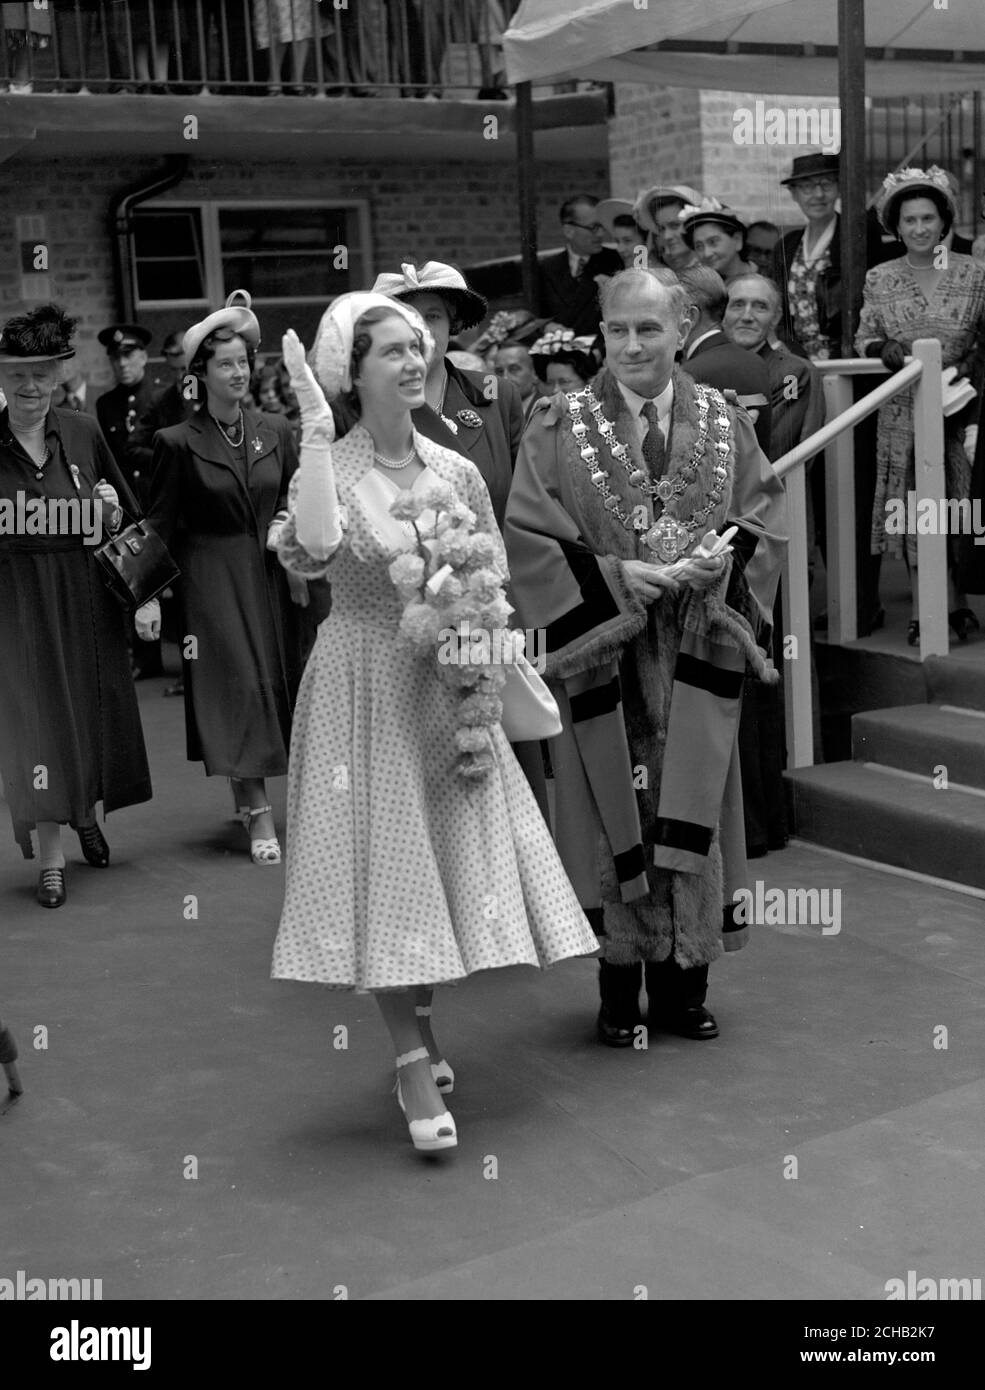 Princess Margaret waving to onlookers as she leaves after opening the new Islington estate in London. Alongside her is Mayor of Islington Ald. H.J.L. Lygoe. Stock Photo